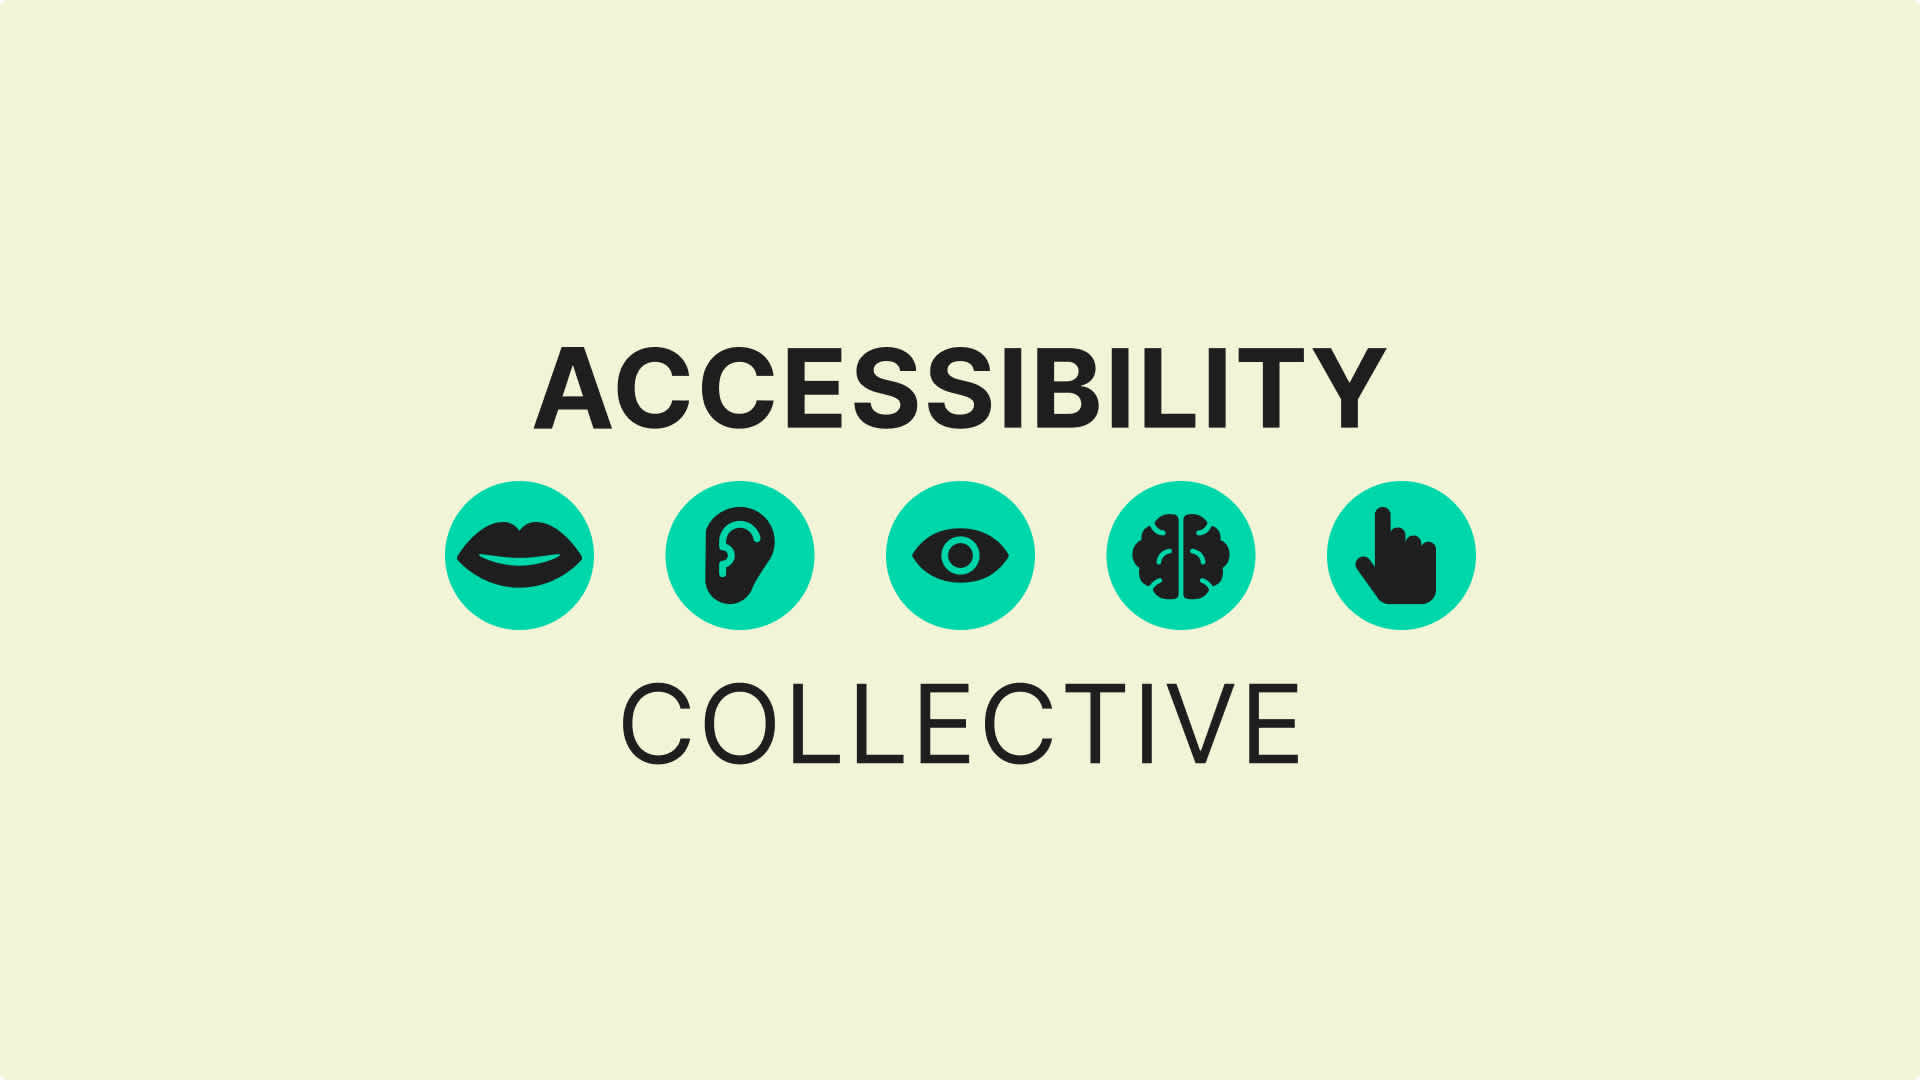 Accessibility icons - mouth, ear, eye, brain and pointing finger